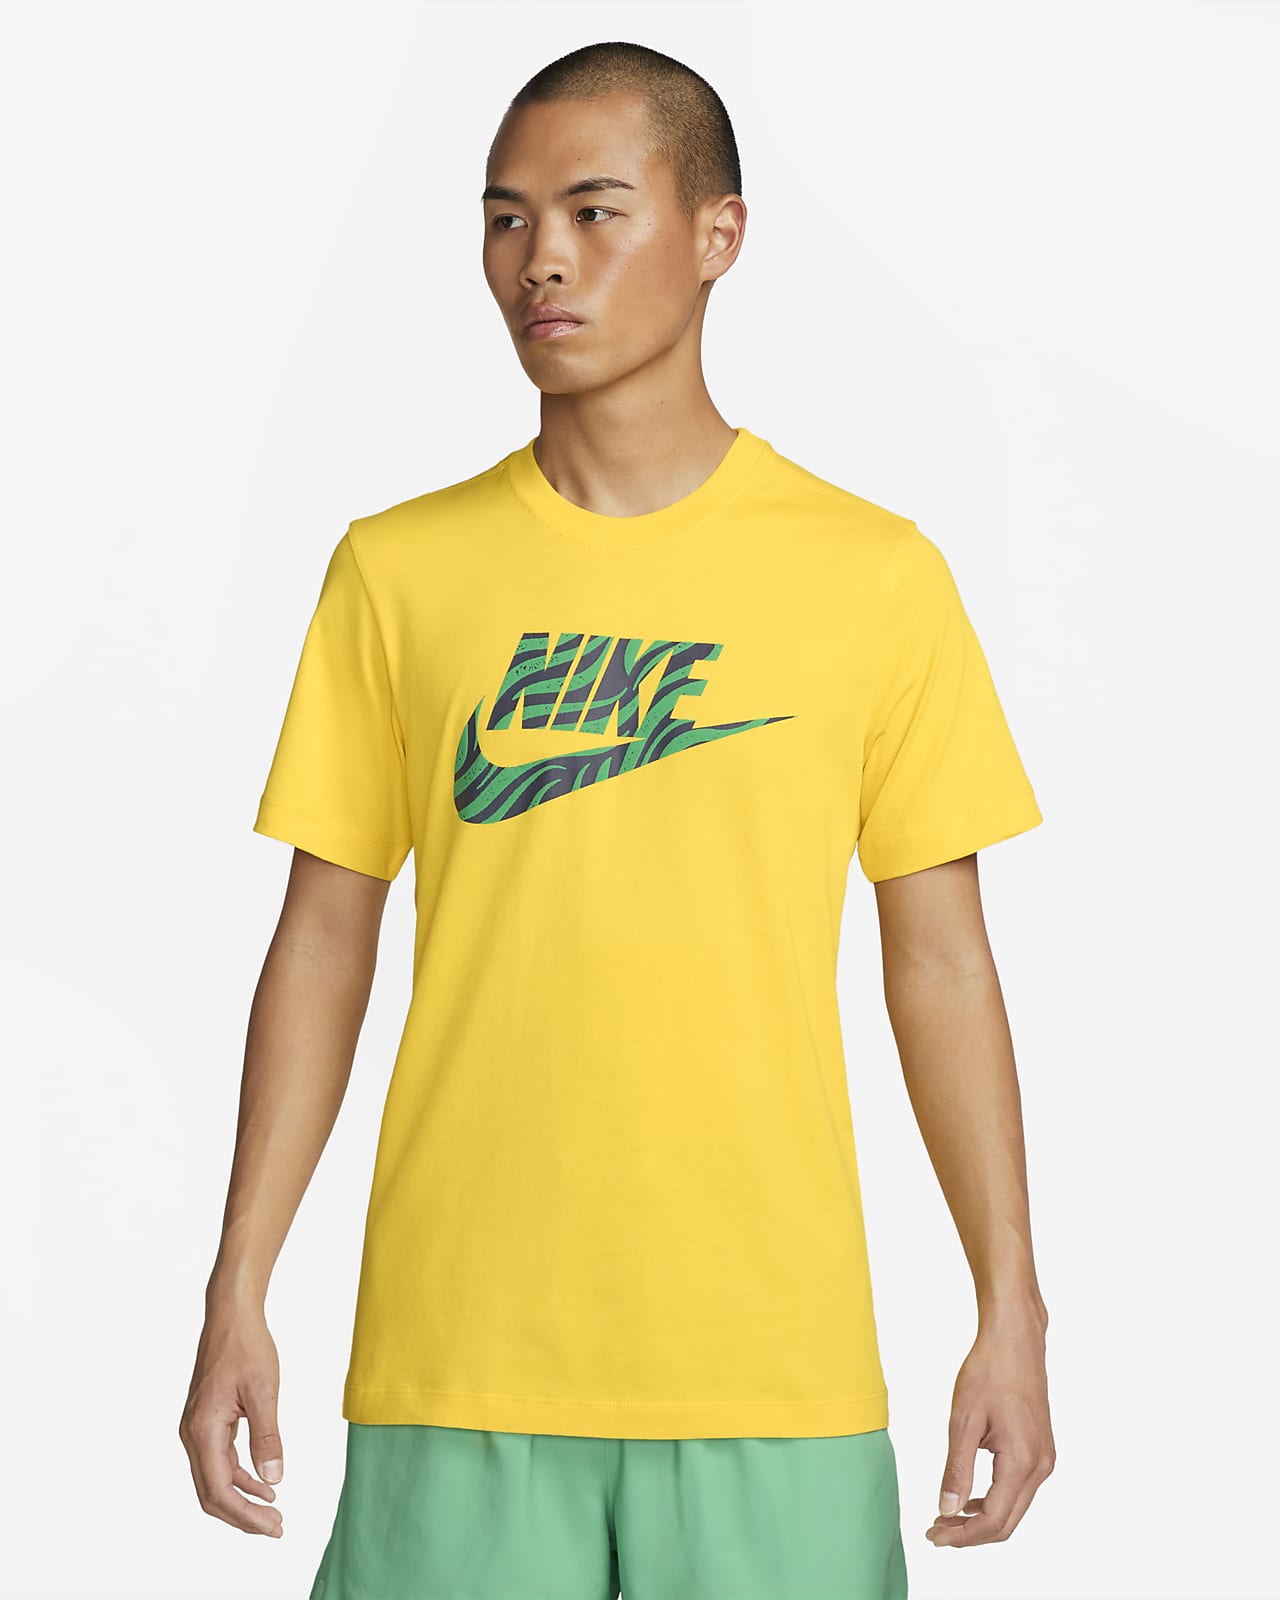 Nike Mens T Shirt Gym Cotton Sports Crew Neck Jogging Casual Tee Top Sizes